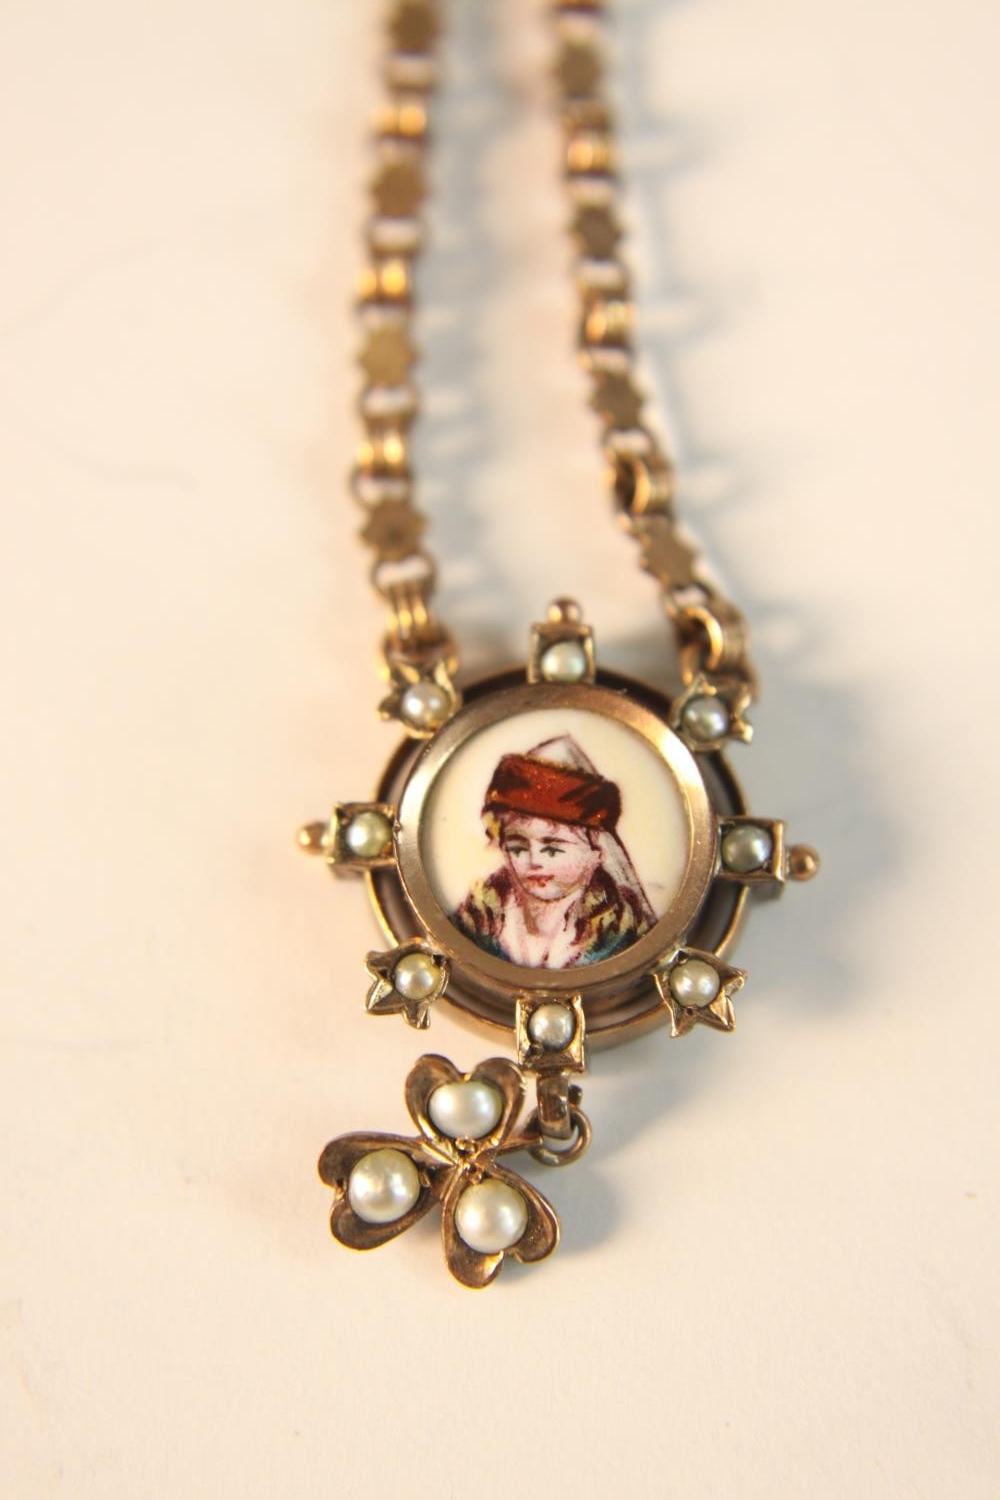 A 19th century rose gold plated watch fob, the end pendant a hand painted portrait on enamel of a - Image 5 of 7